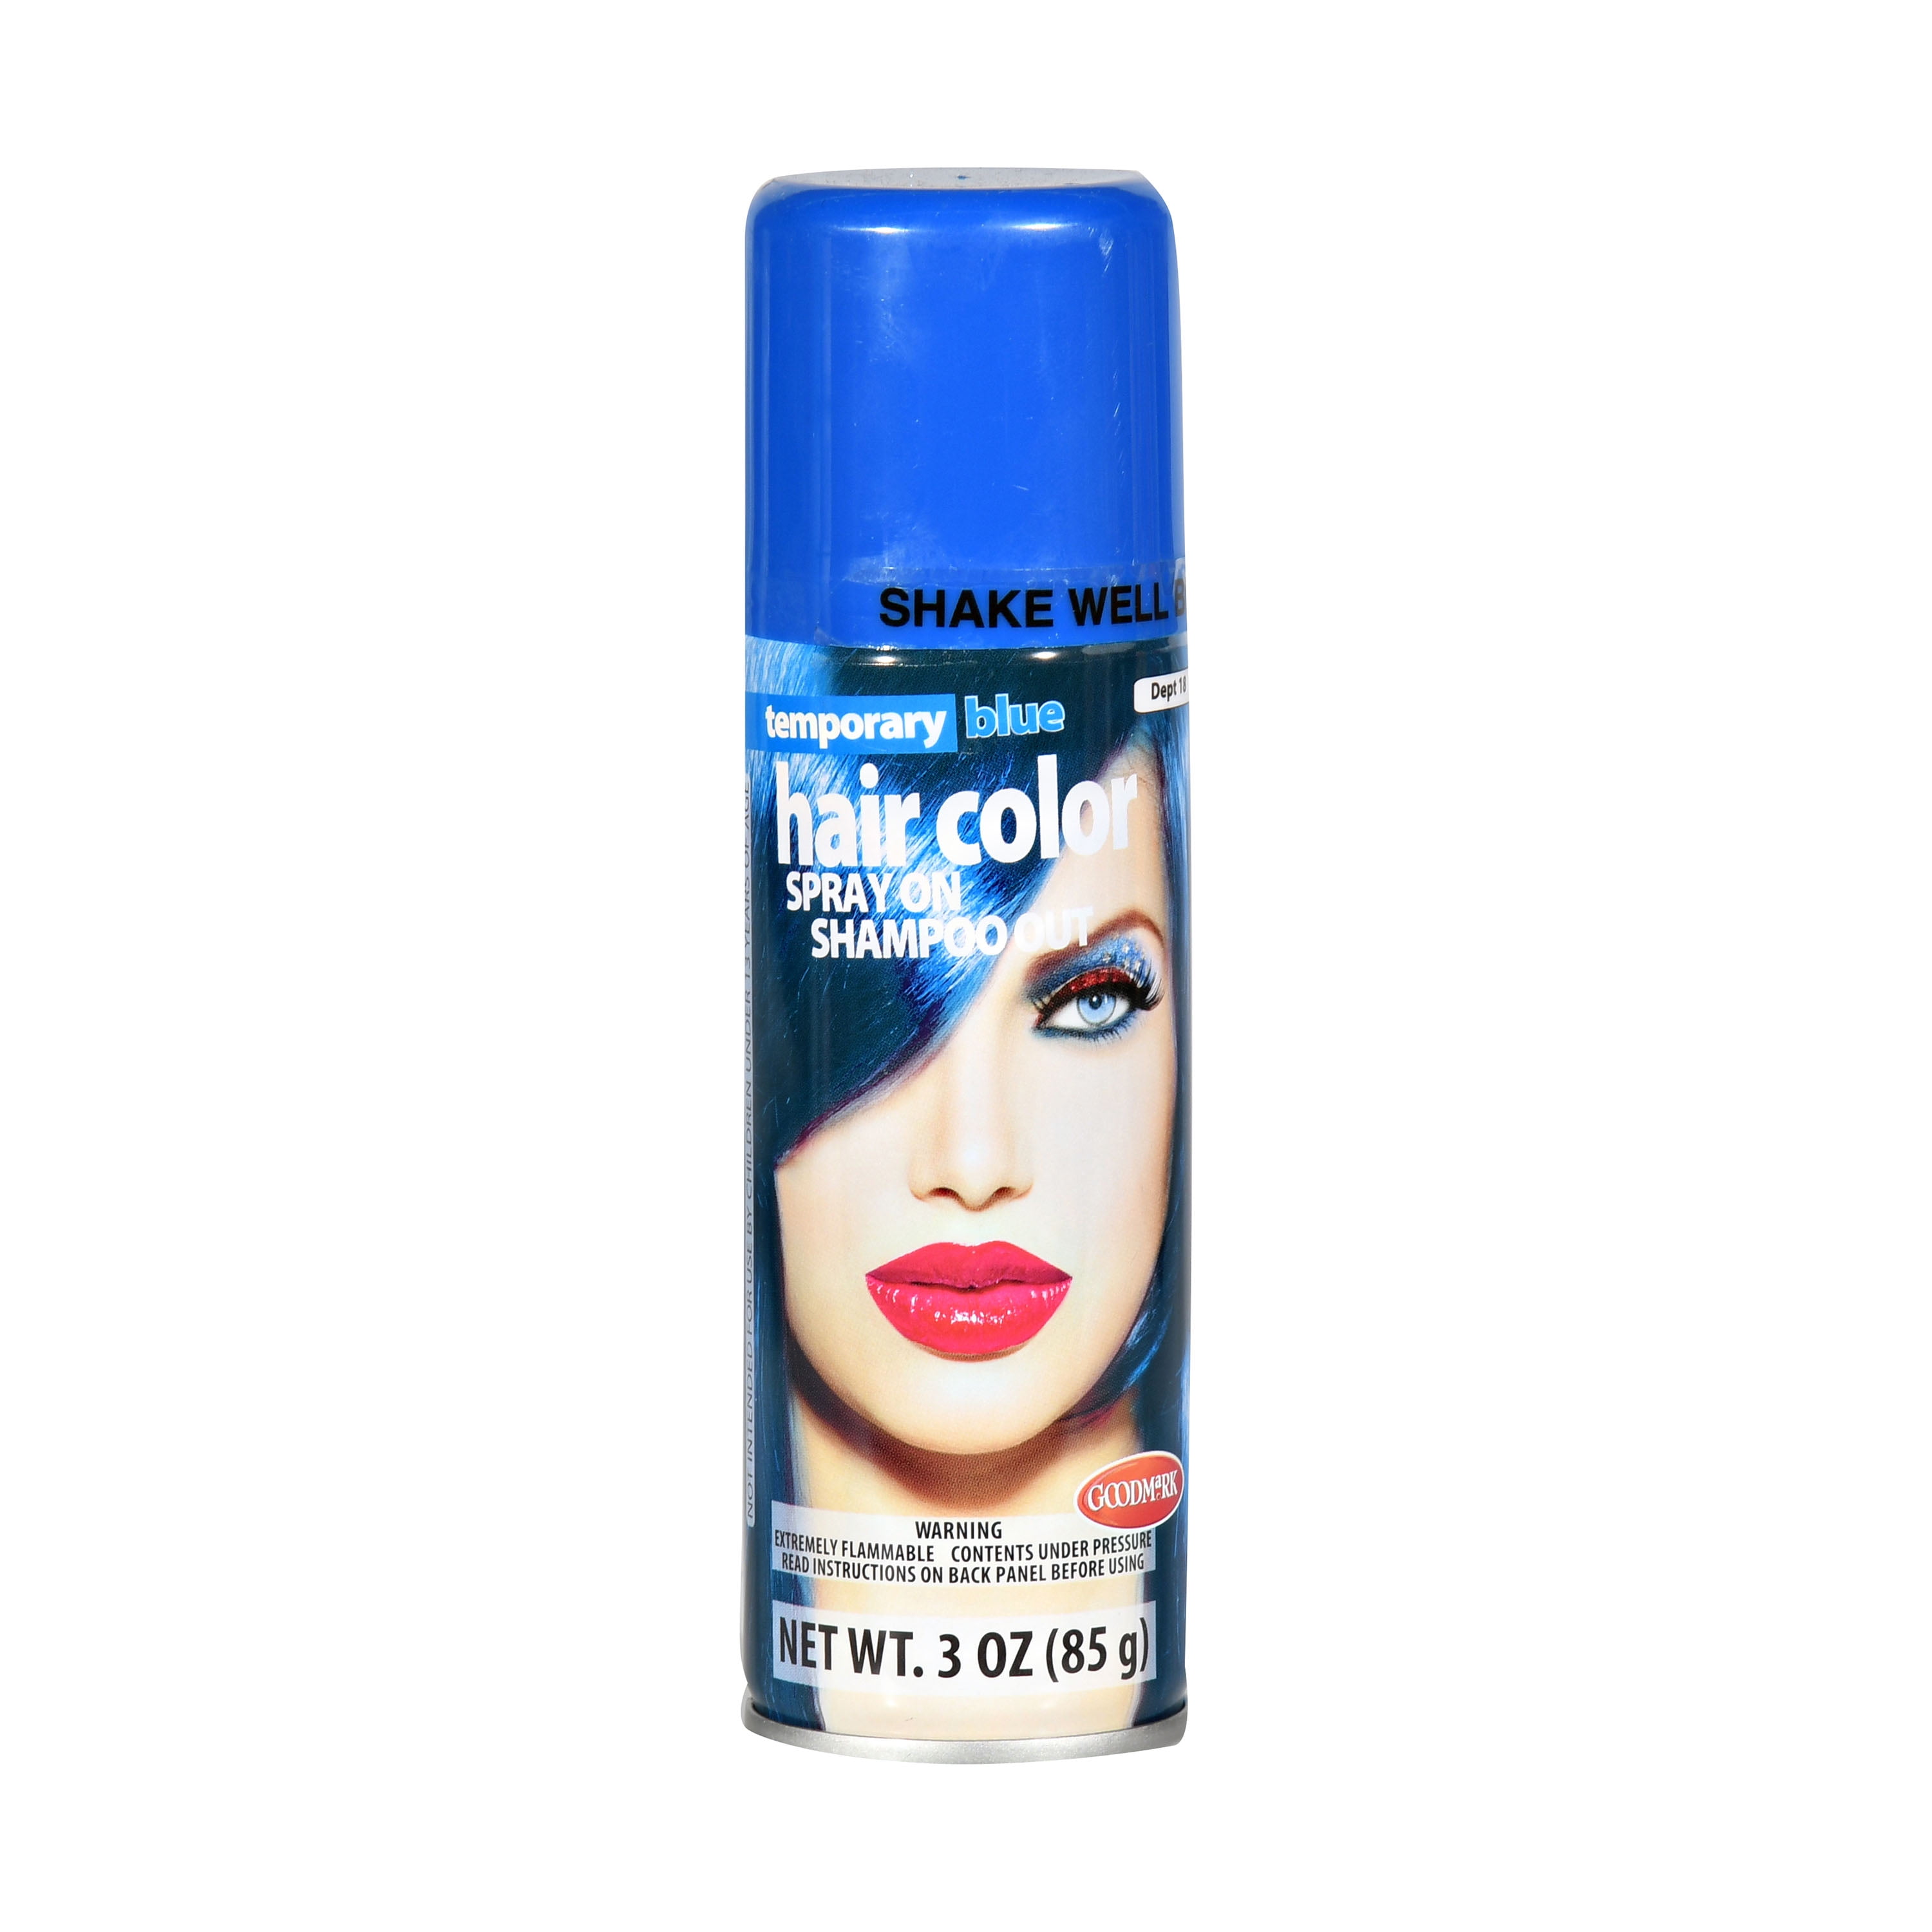 Goodmark Halloween Temporary Hair Color Spray, Net Wt. 3oz (85g) is perfect  when you want to create a fun new look. Choose from a variety of colors ( colors sold separately). Hair Color